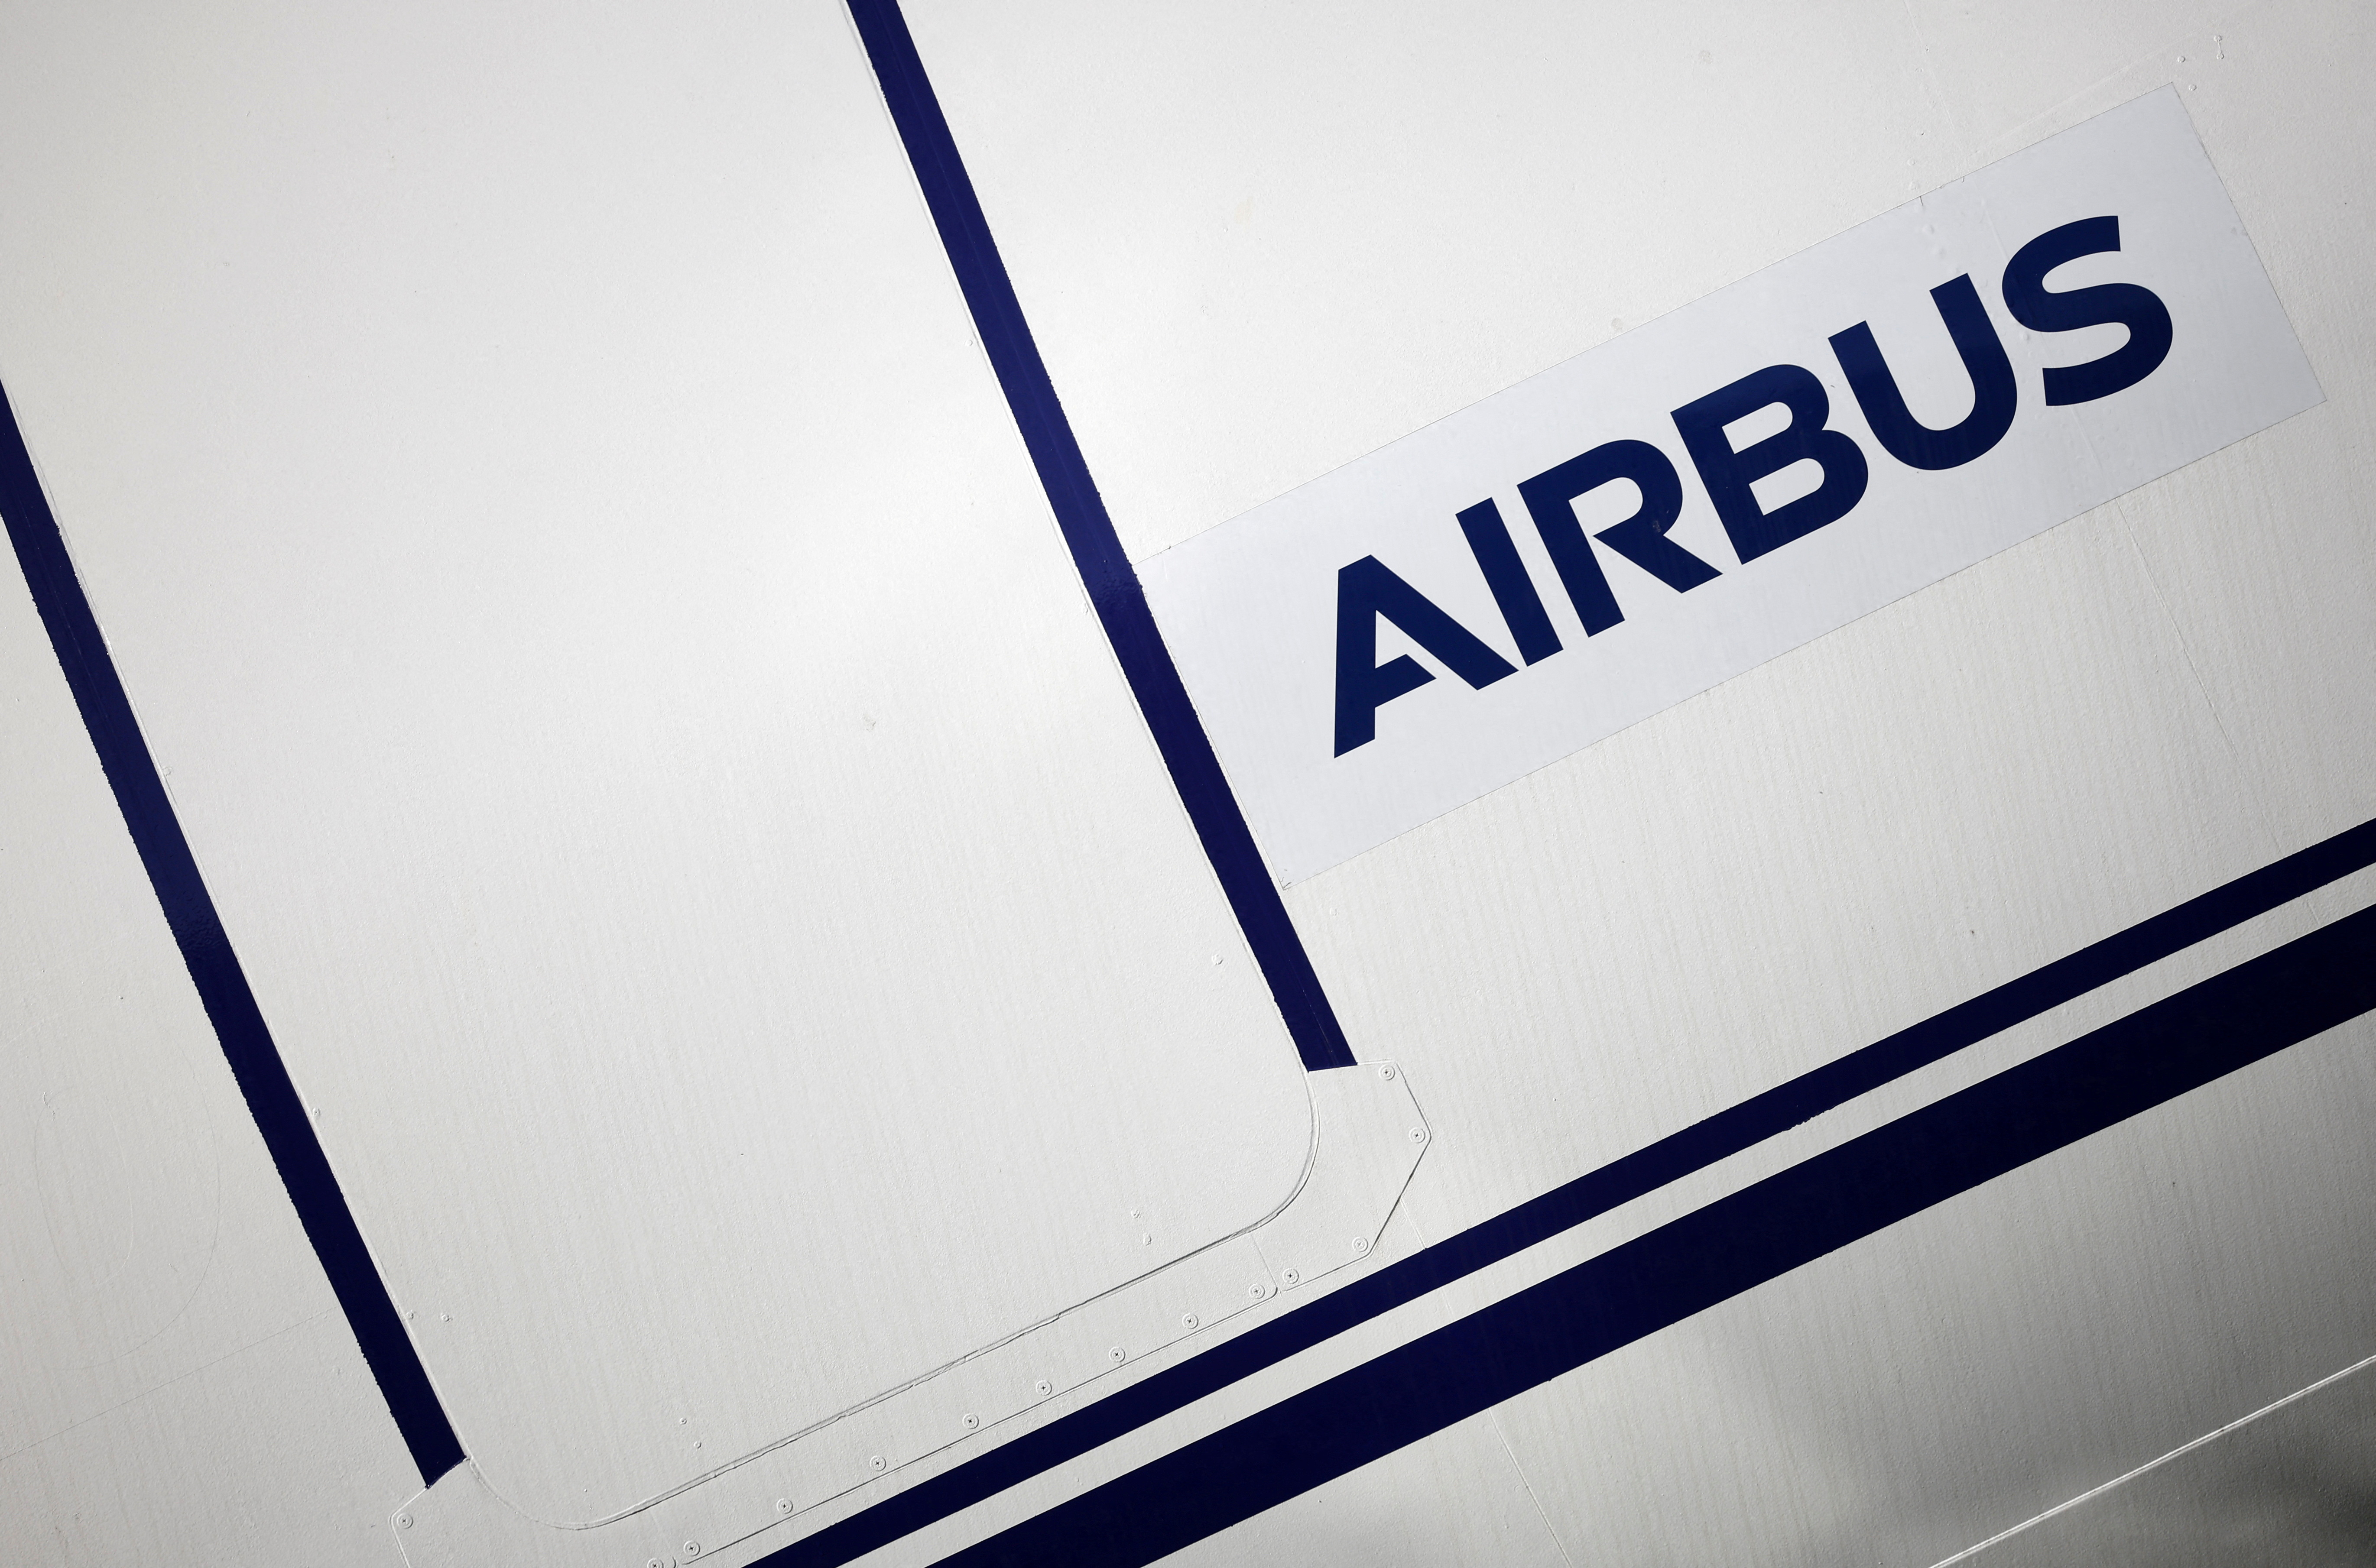 Airbus logo at the Airbus facility in Saint-Nazaire